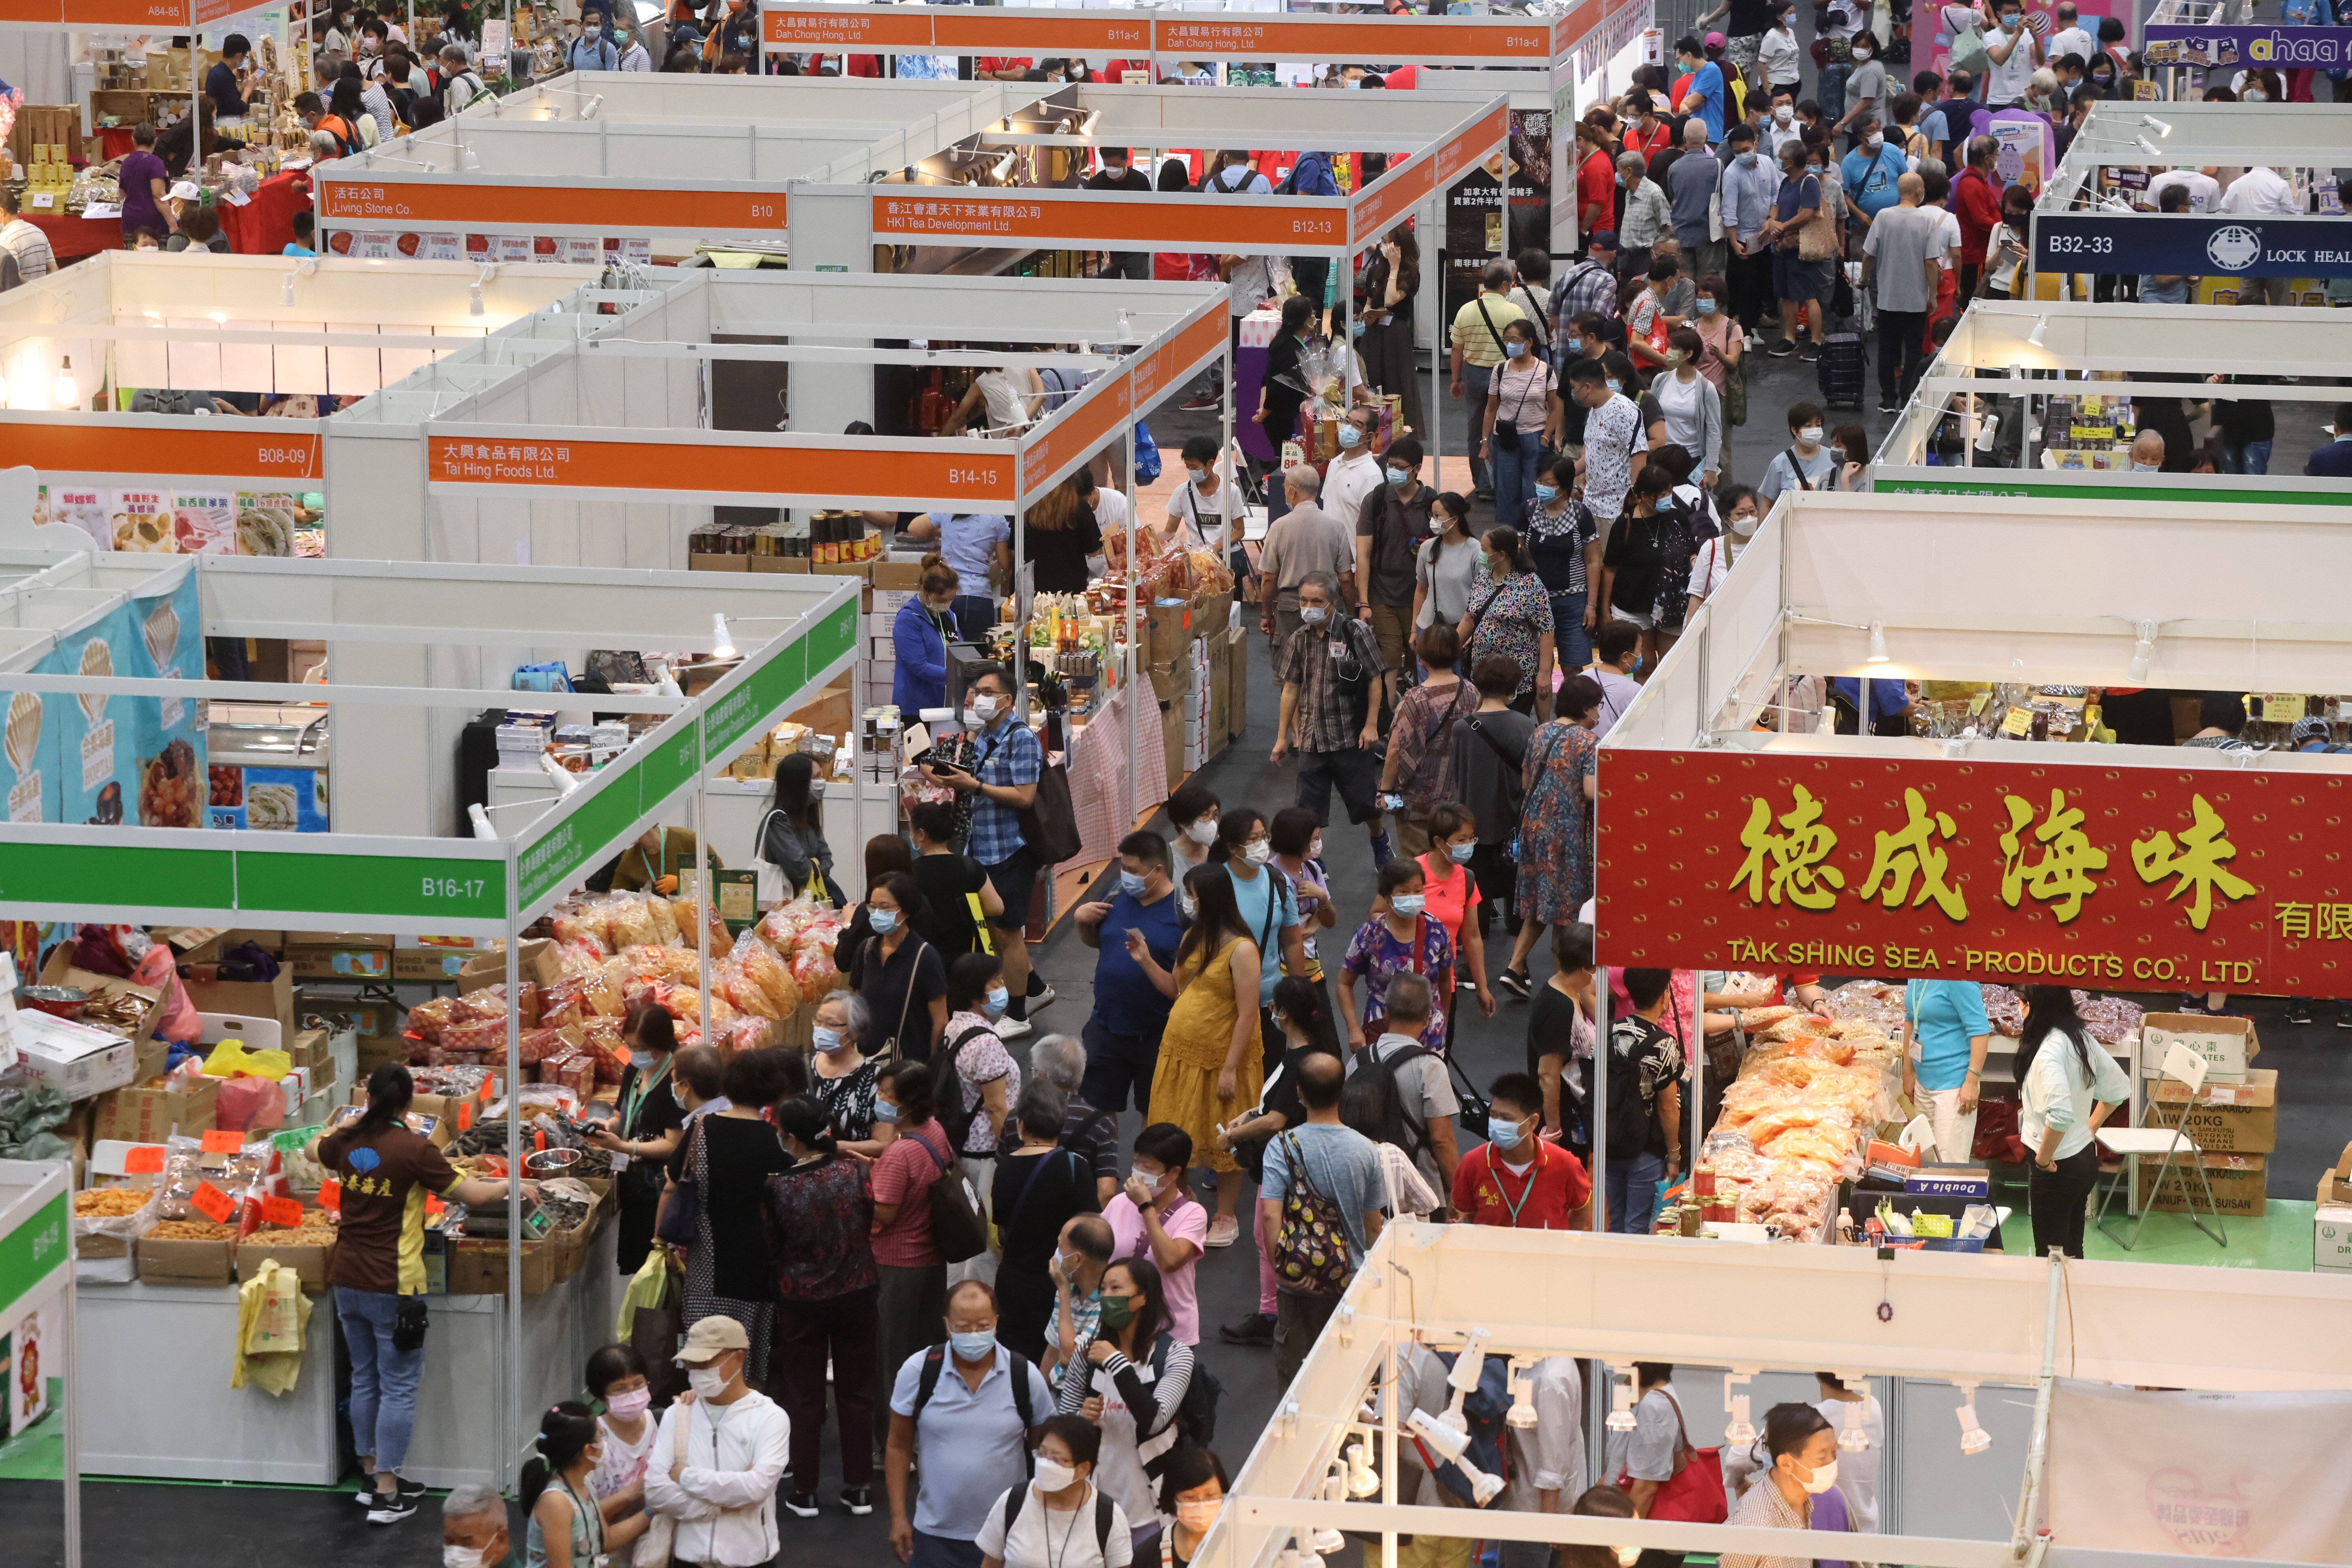 Visitors at the Hong Kong Brands and Products Shopping Festival at Asia World Expo on Friday. Photo: K. Y. Cheng